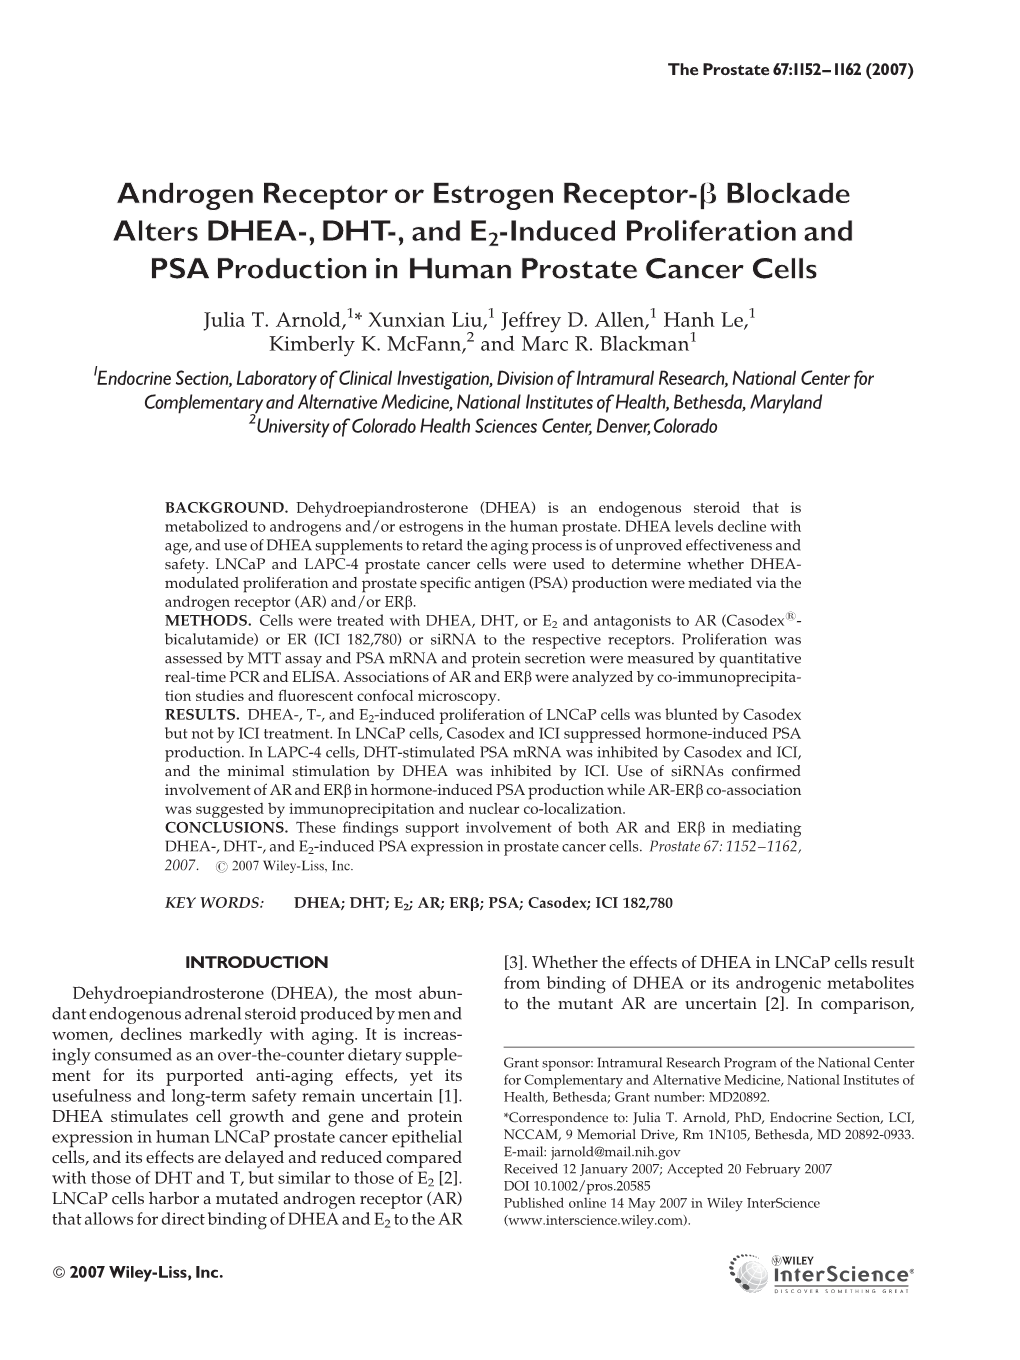 Blockade Alters DHEA-, DHT-, and E2-Induced Proliferation and PSA Production in Hu